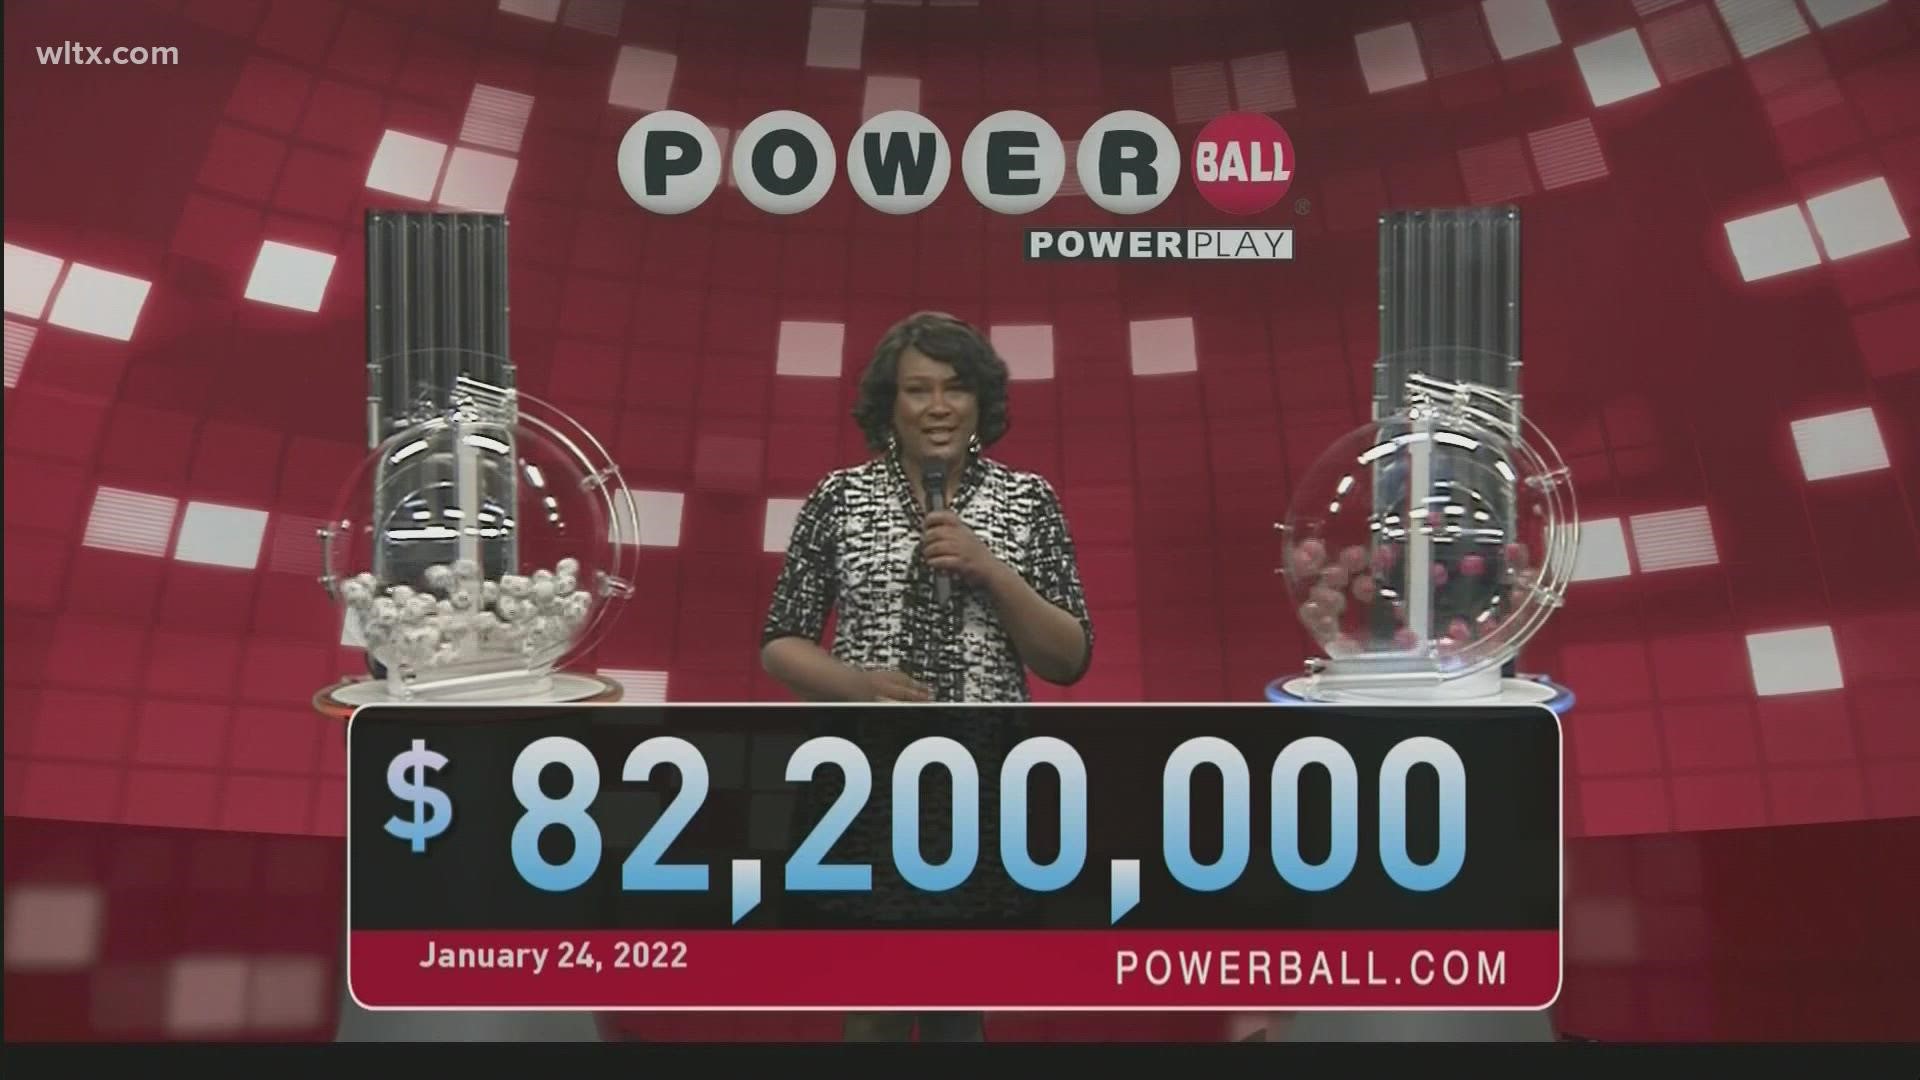 Here are the winning Powerball numbers for Monday, January 24, 2022.